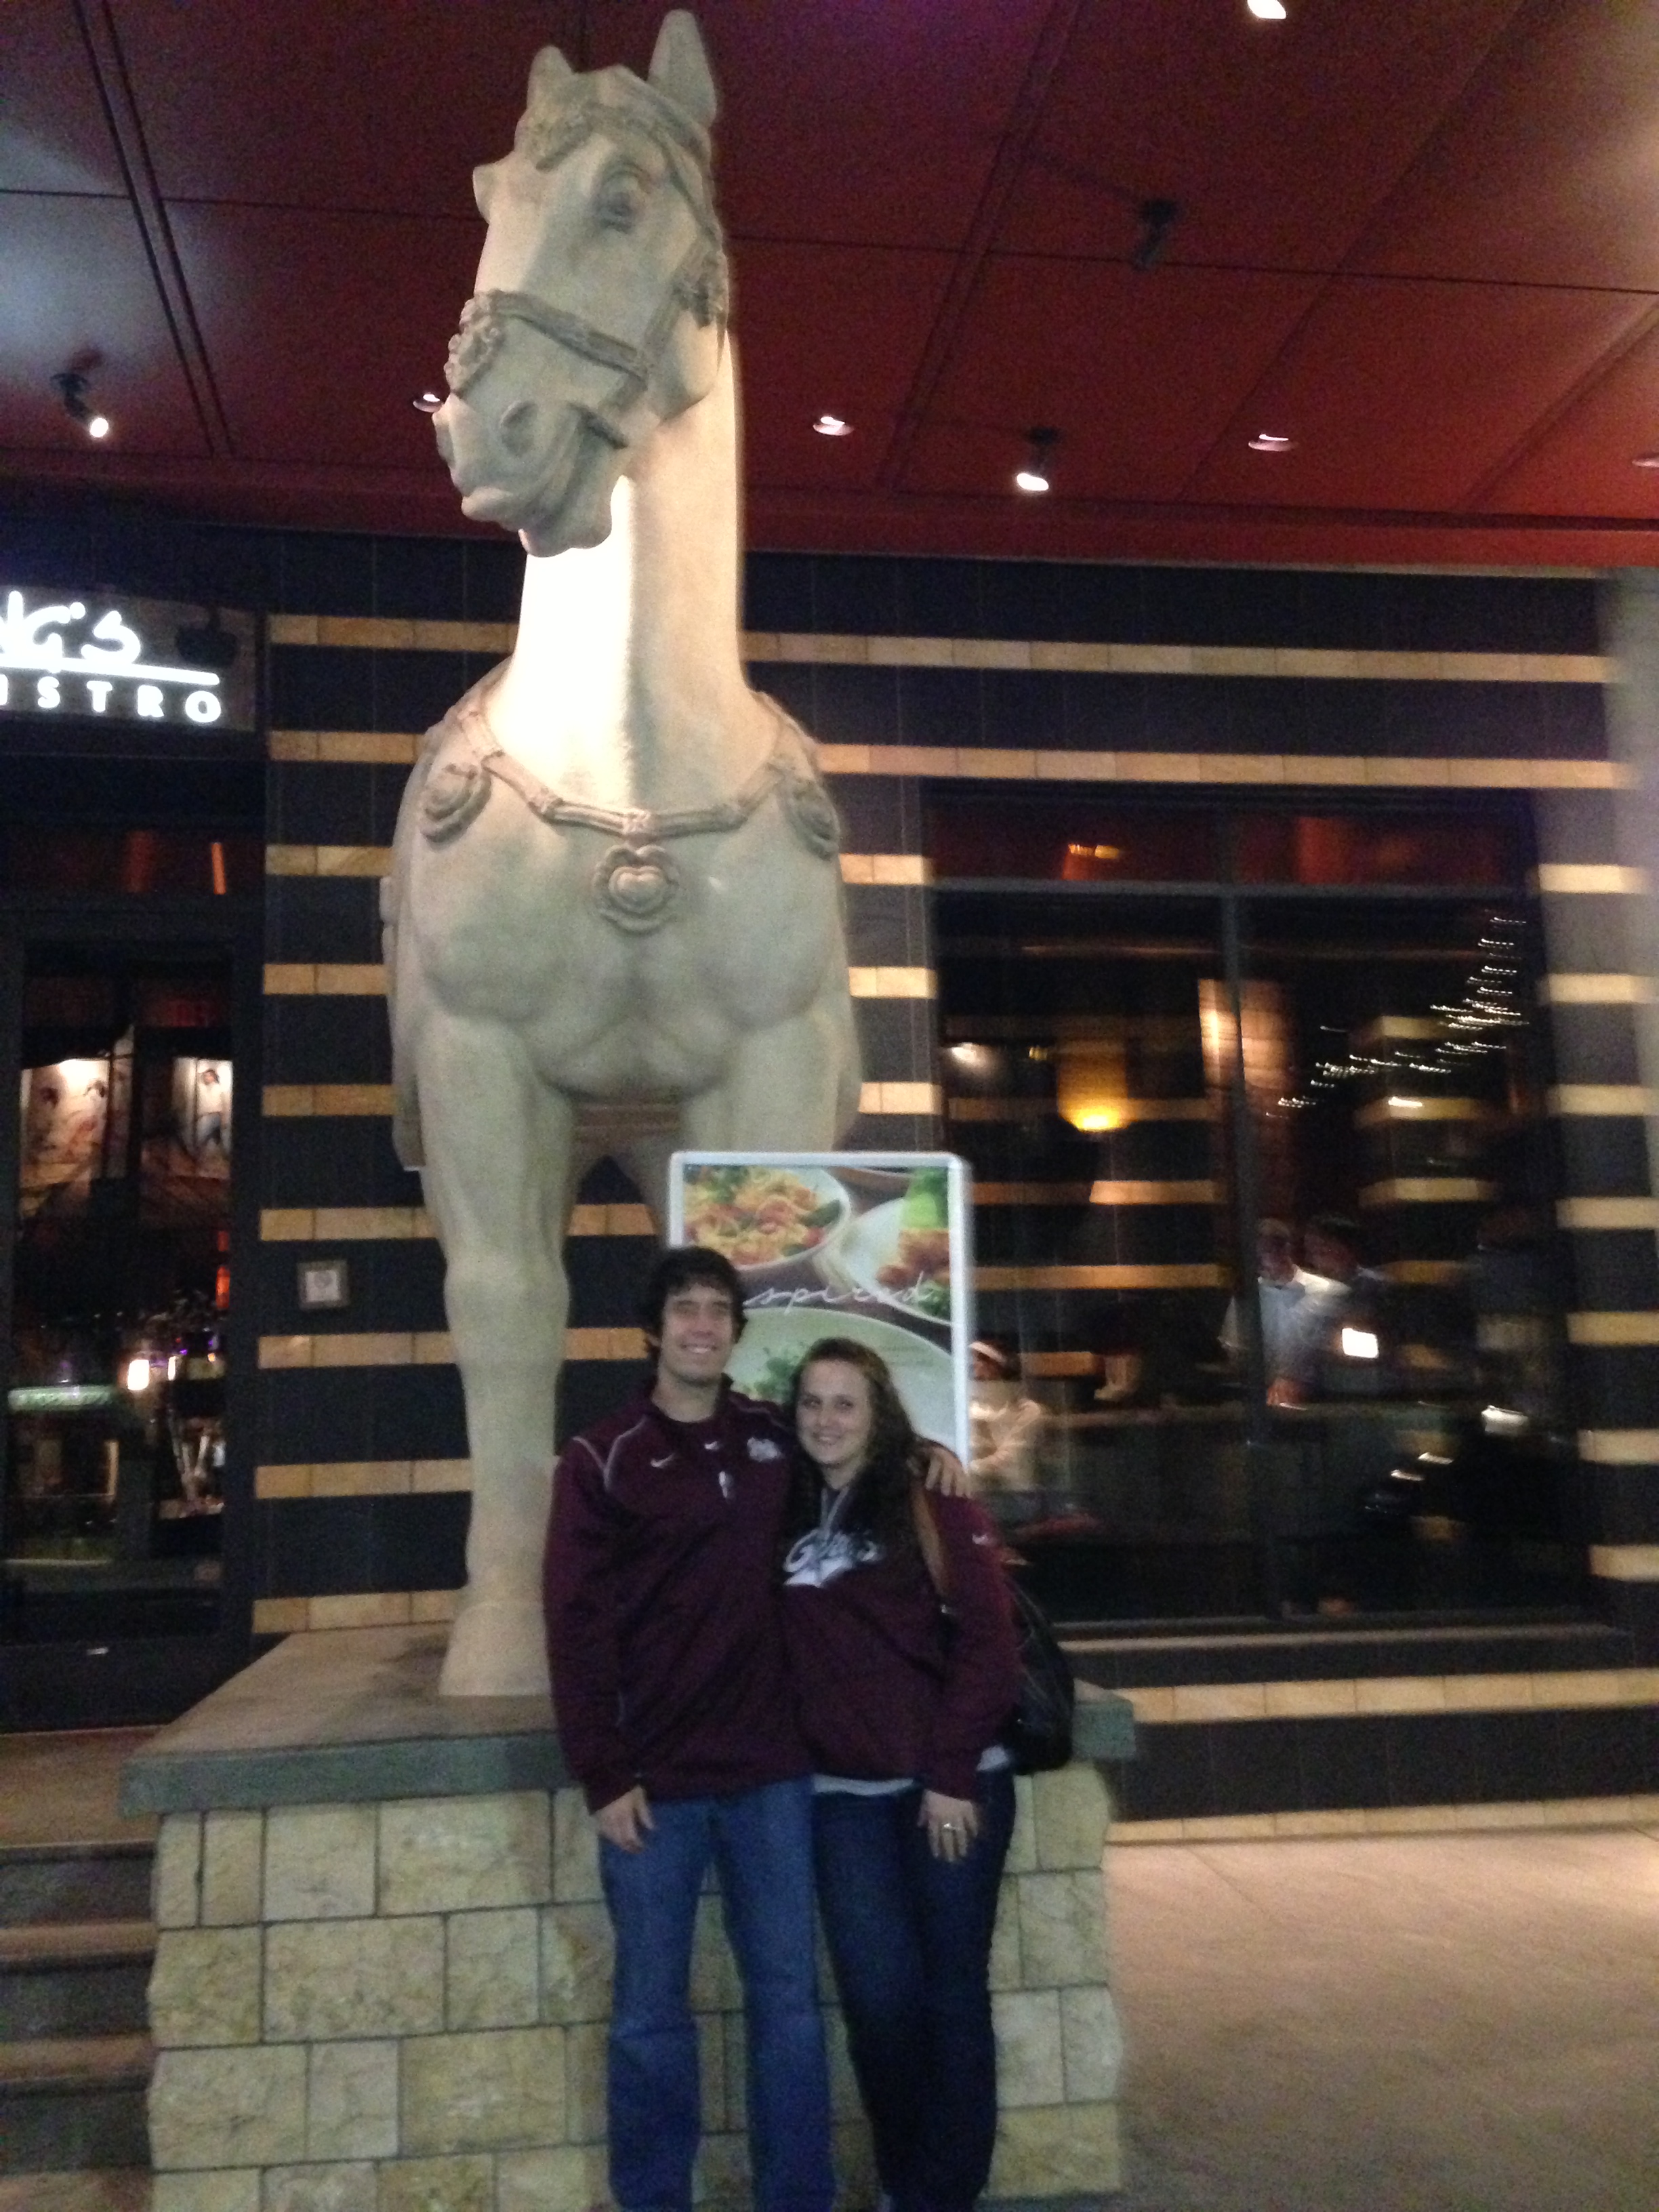 Misti and I outside the Spokane P.F. Chang's in front of the famous horse.